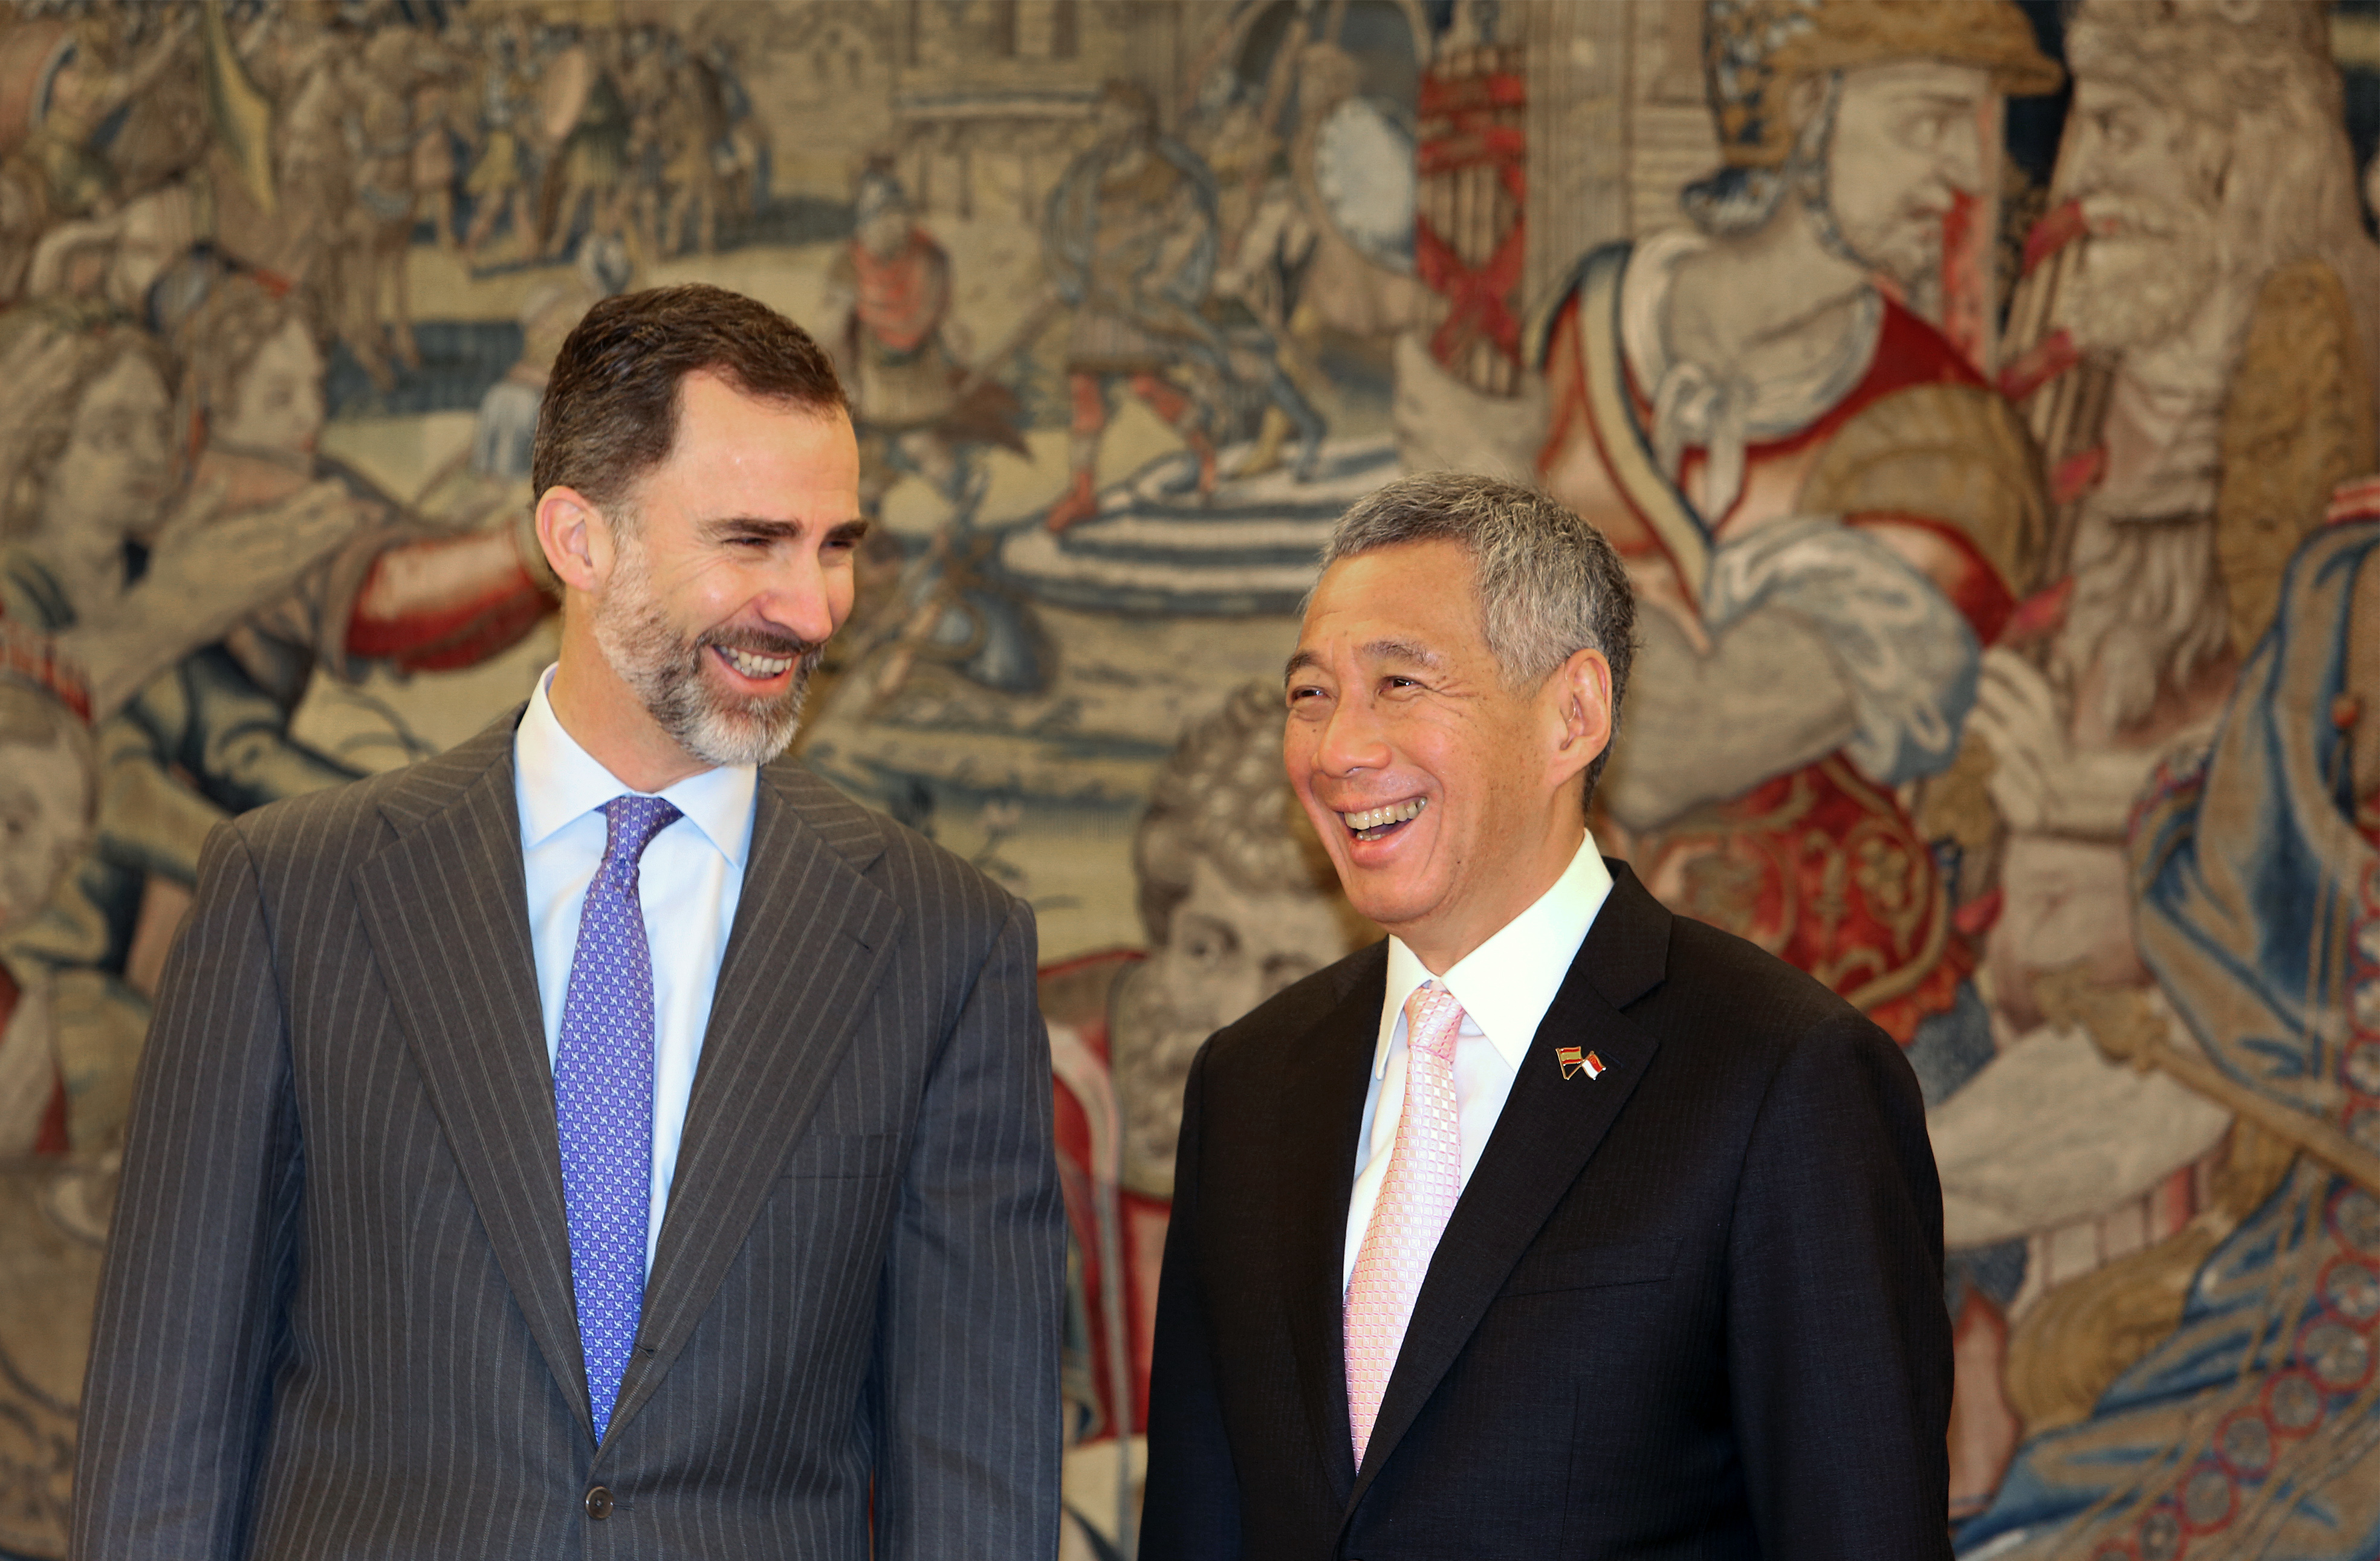 Visit to Spain by Prime Minister Lee Hsien Loong - Feb 2015 (MCI Photo by Terence Tan)